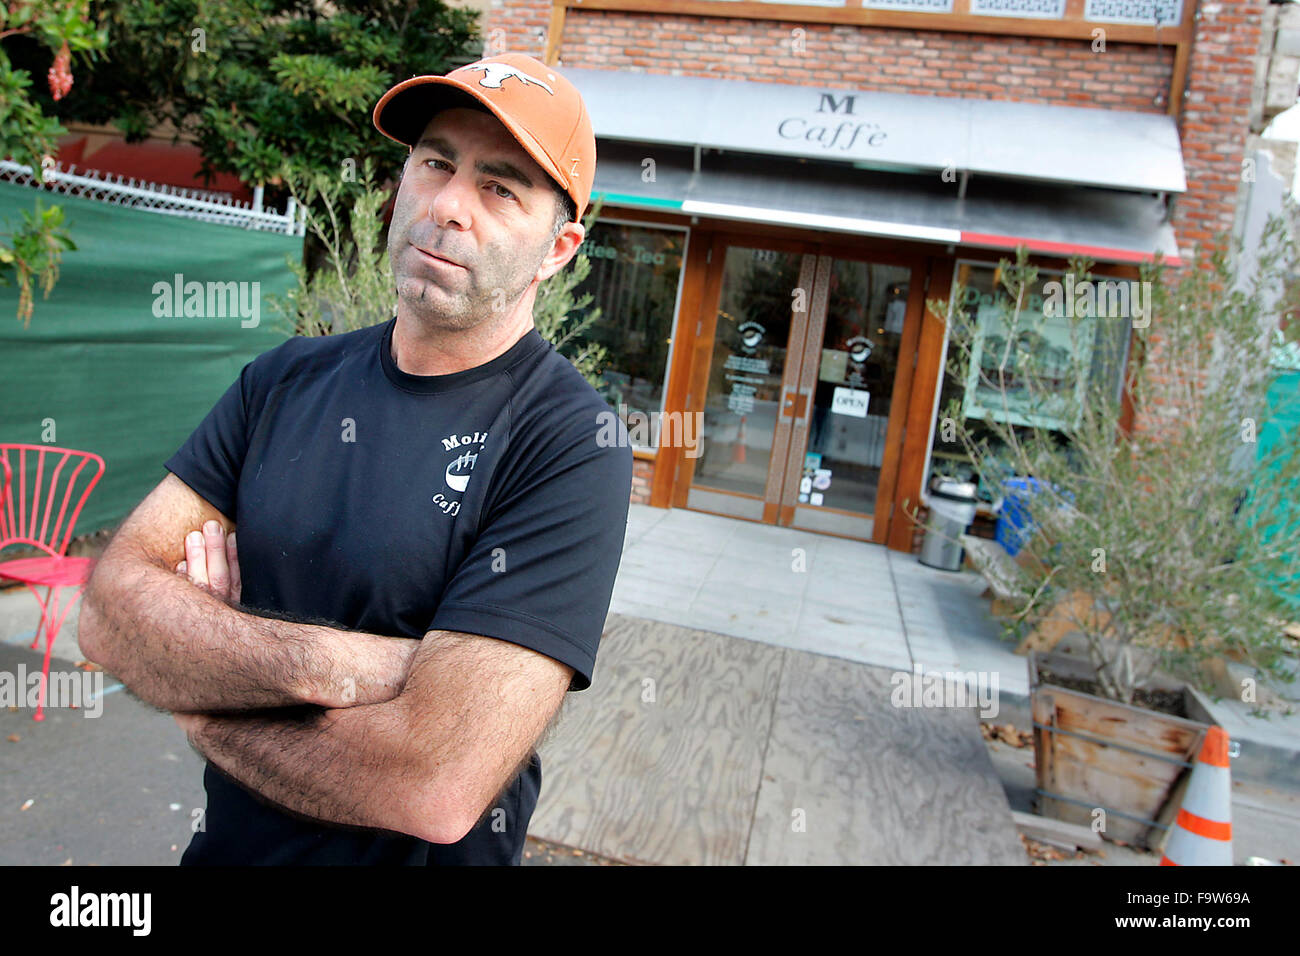 Napa, CA, USA. 18th Dec, 2015. Rick Molinari, seen outside his Brown Street business, Molinari Caffe, estimates his losses due to the August 2014 earthquake to be about $100,000. He is hopeful that he can remain in business while neighboring buildings undergo repairs. © Napa Valley Register/ZUMA Wire/Alamy Live News Stock Photo